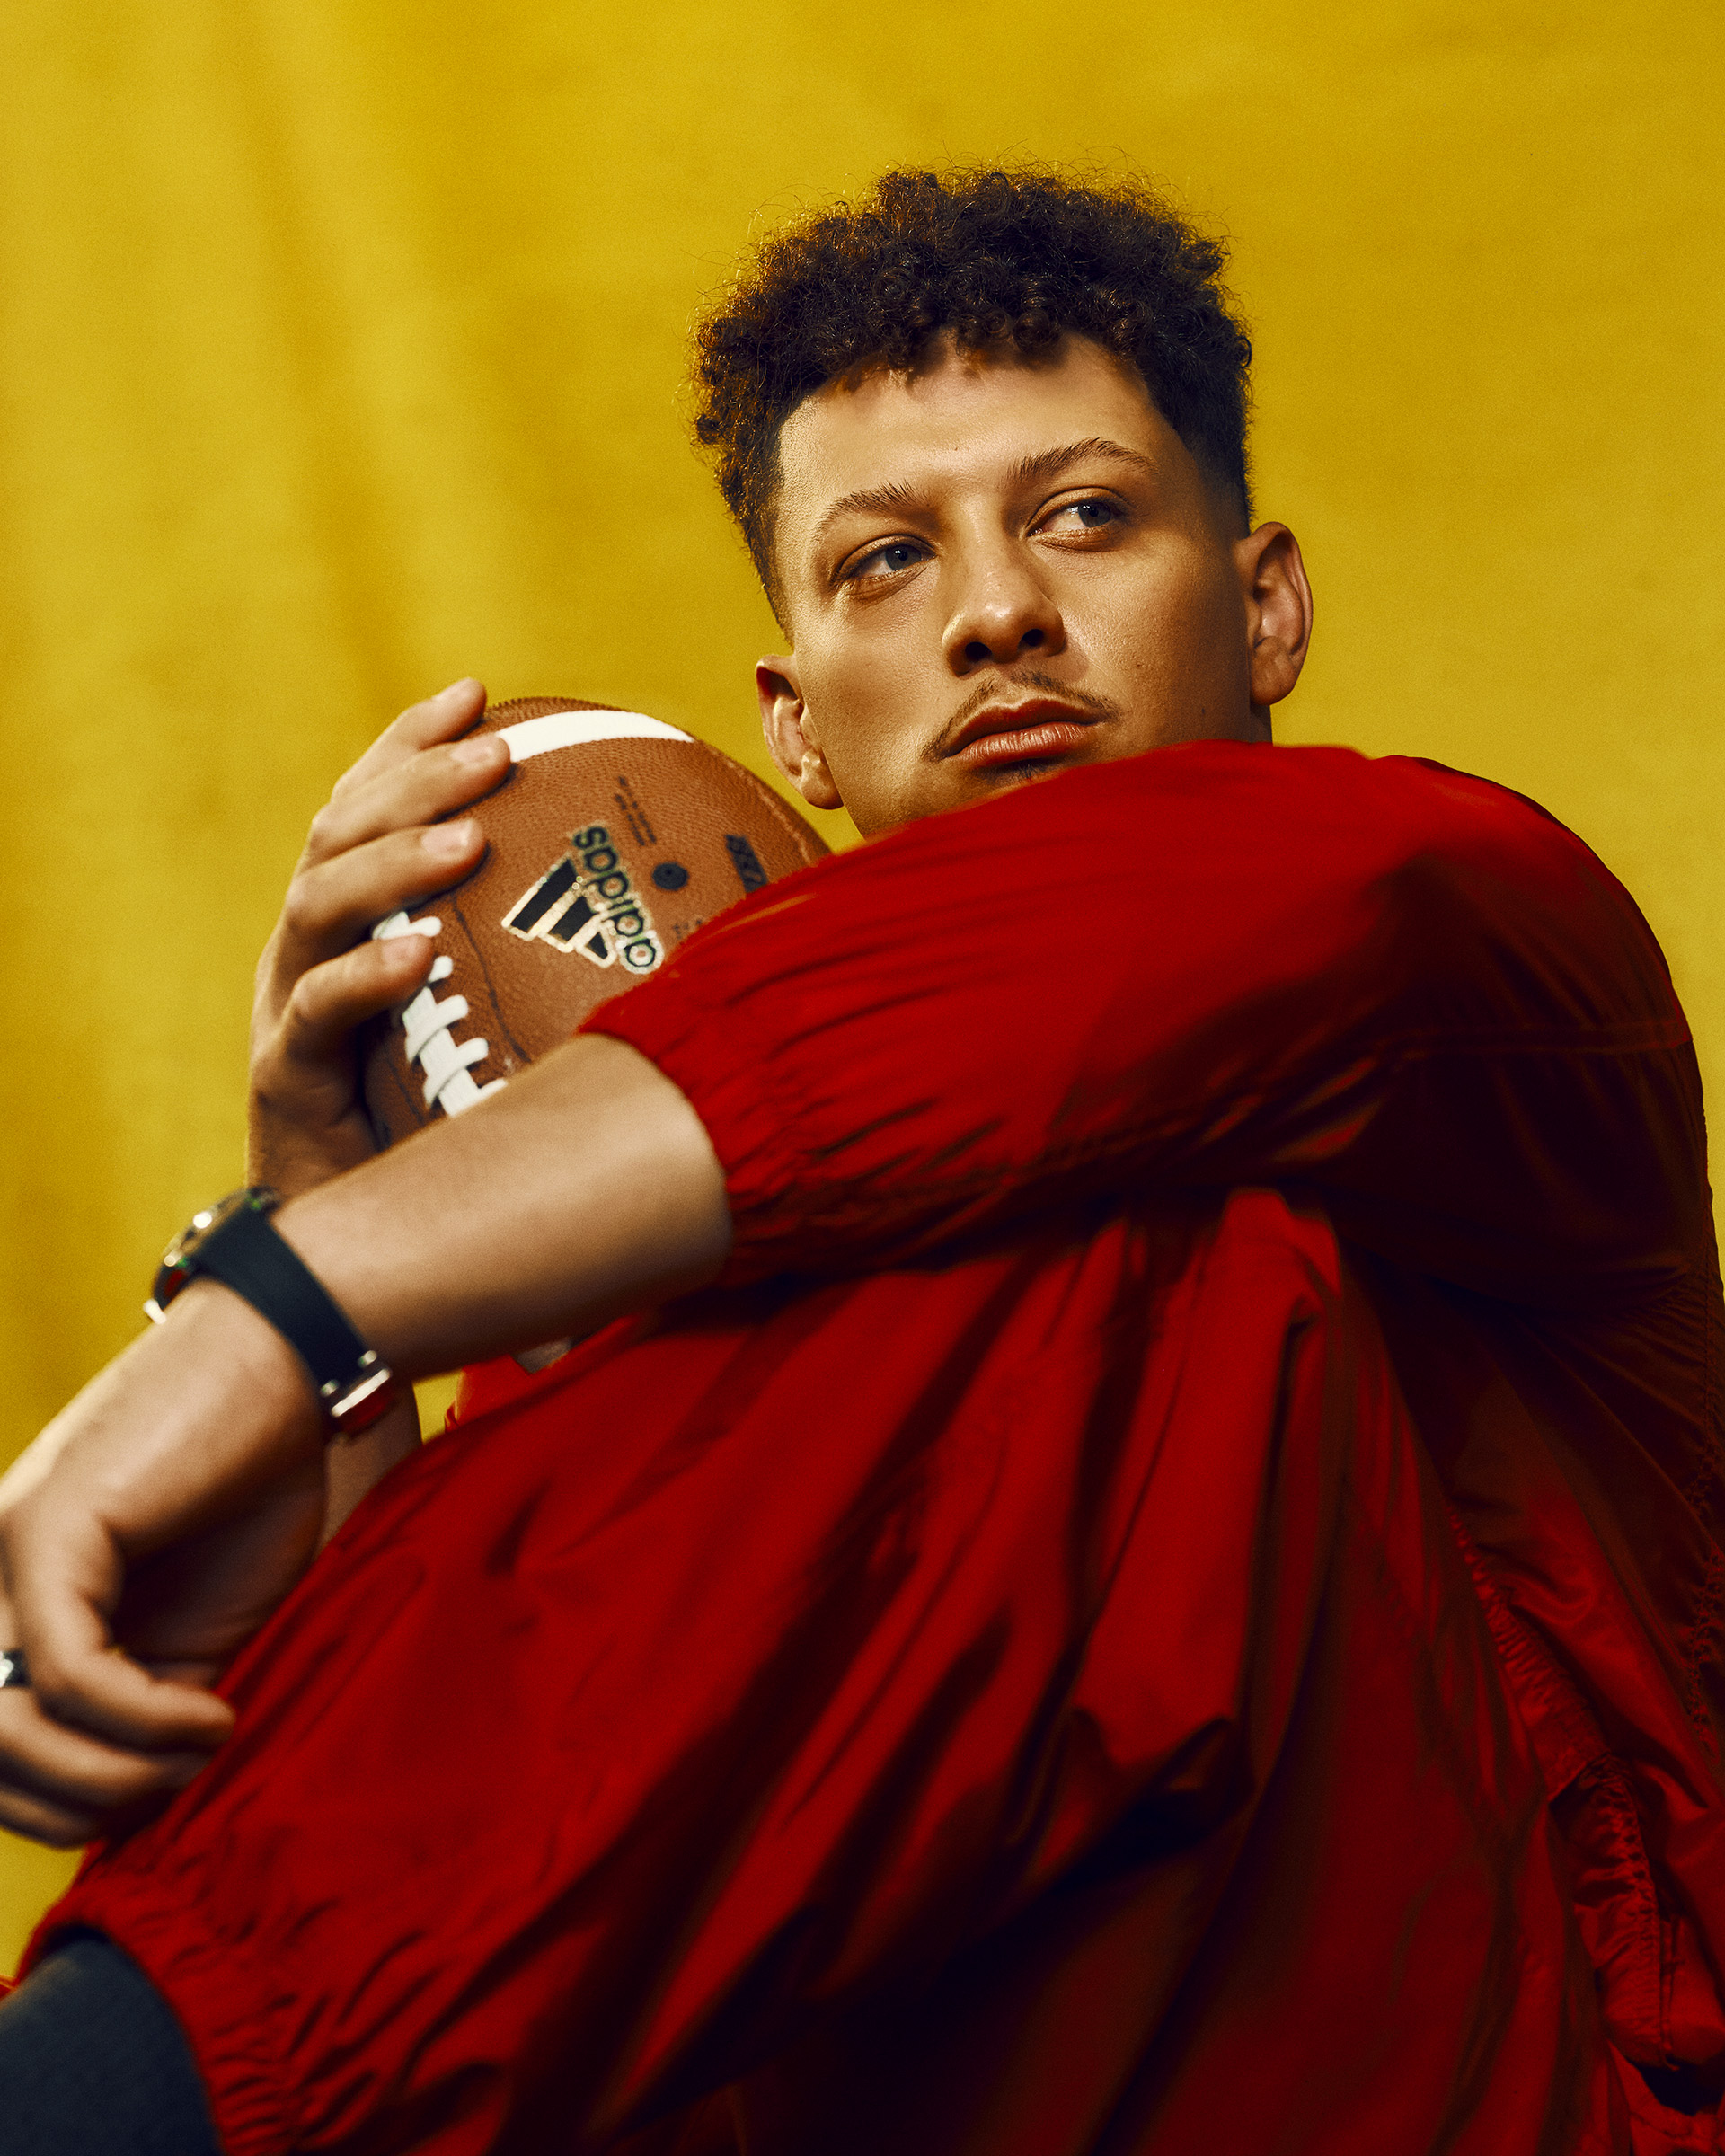 Patrick Mahomes Is Already Thinking About His Next Super Bowl Win